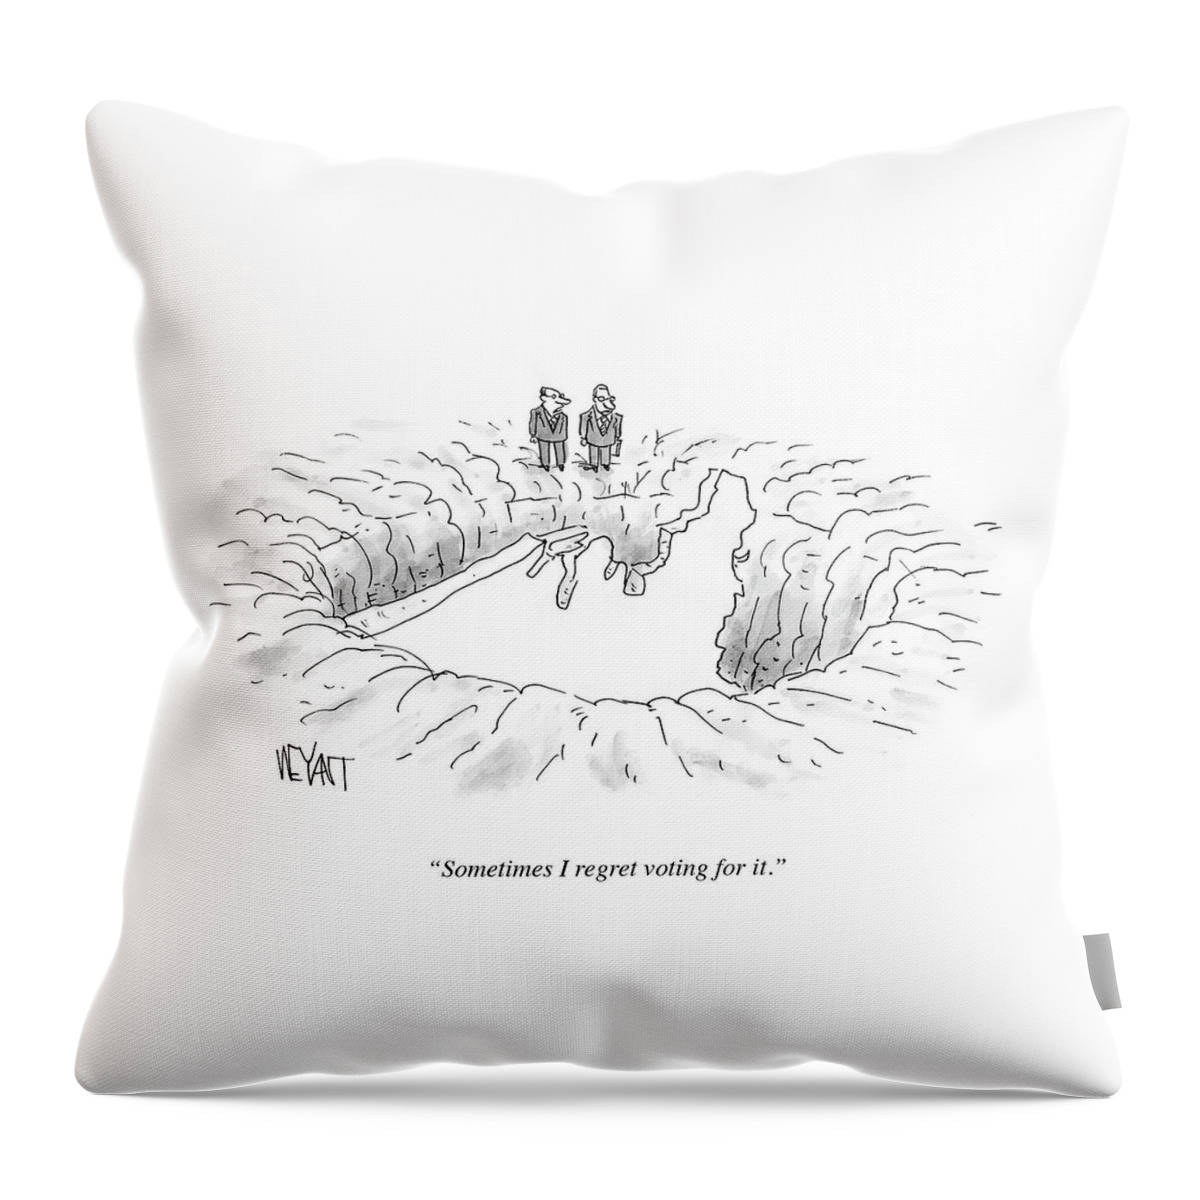 Sometimes I Regret Voting Throw Pillow